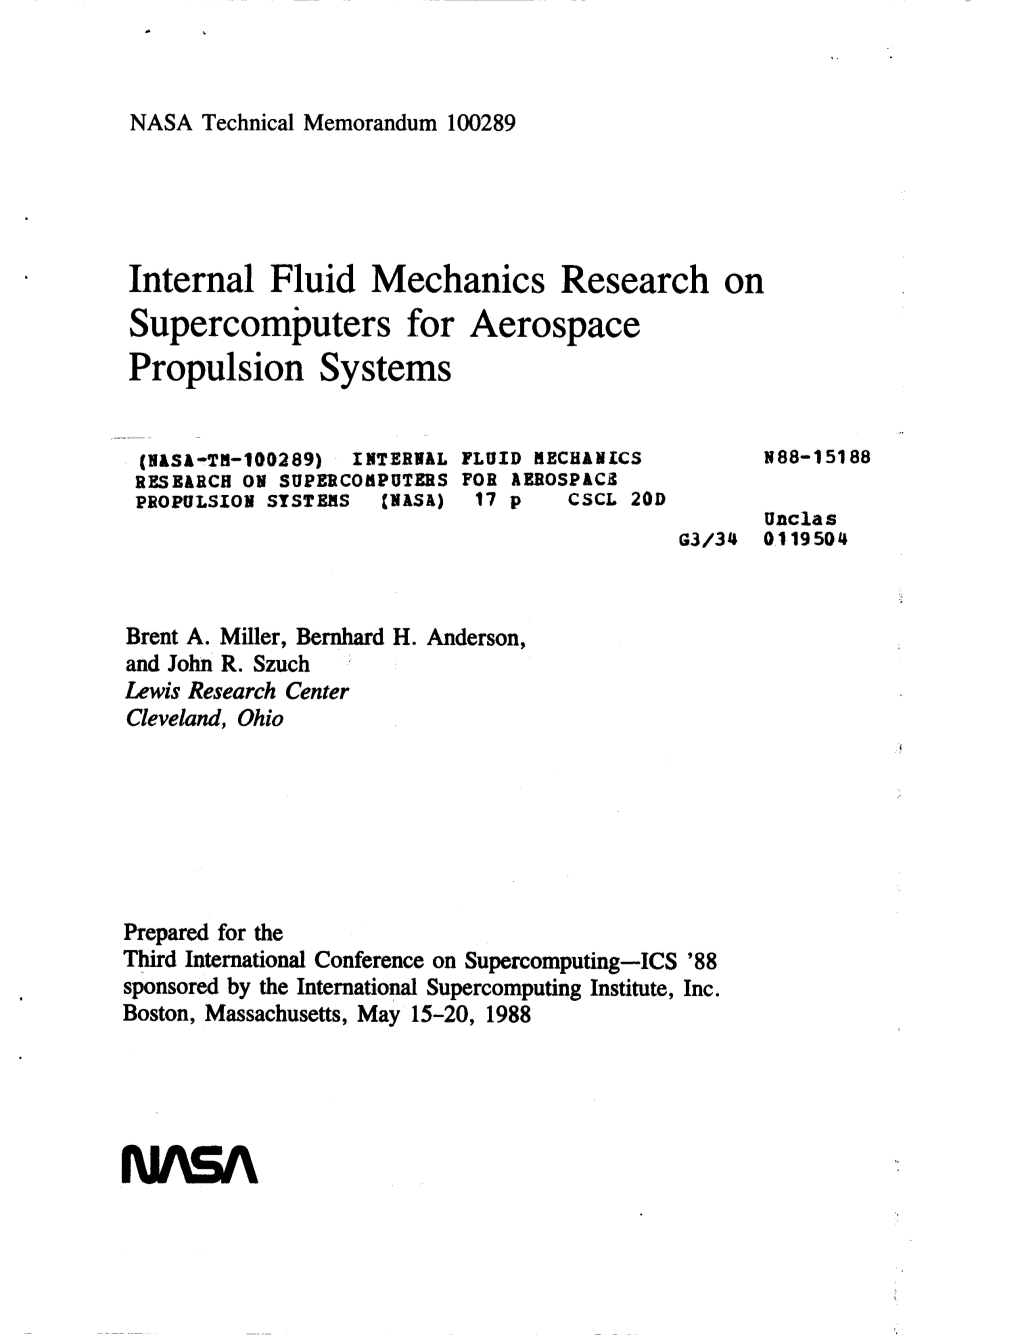 Internal Fluid Mechanics Research on Supercomputers for Aerospace Propulsion Systems